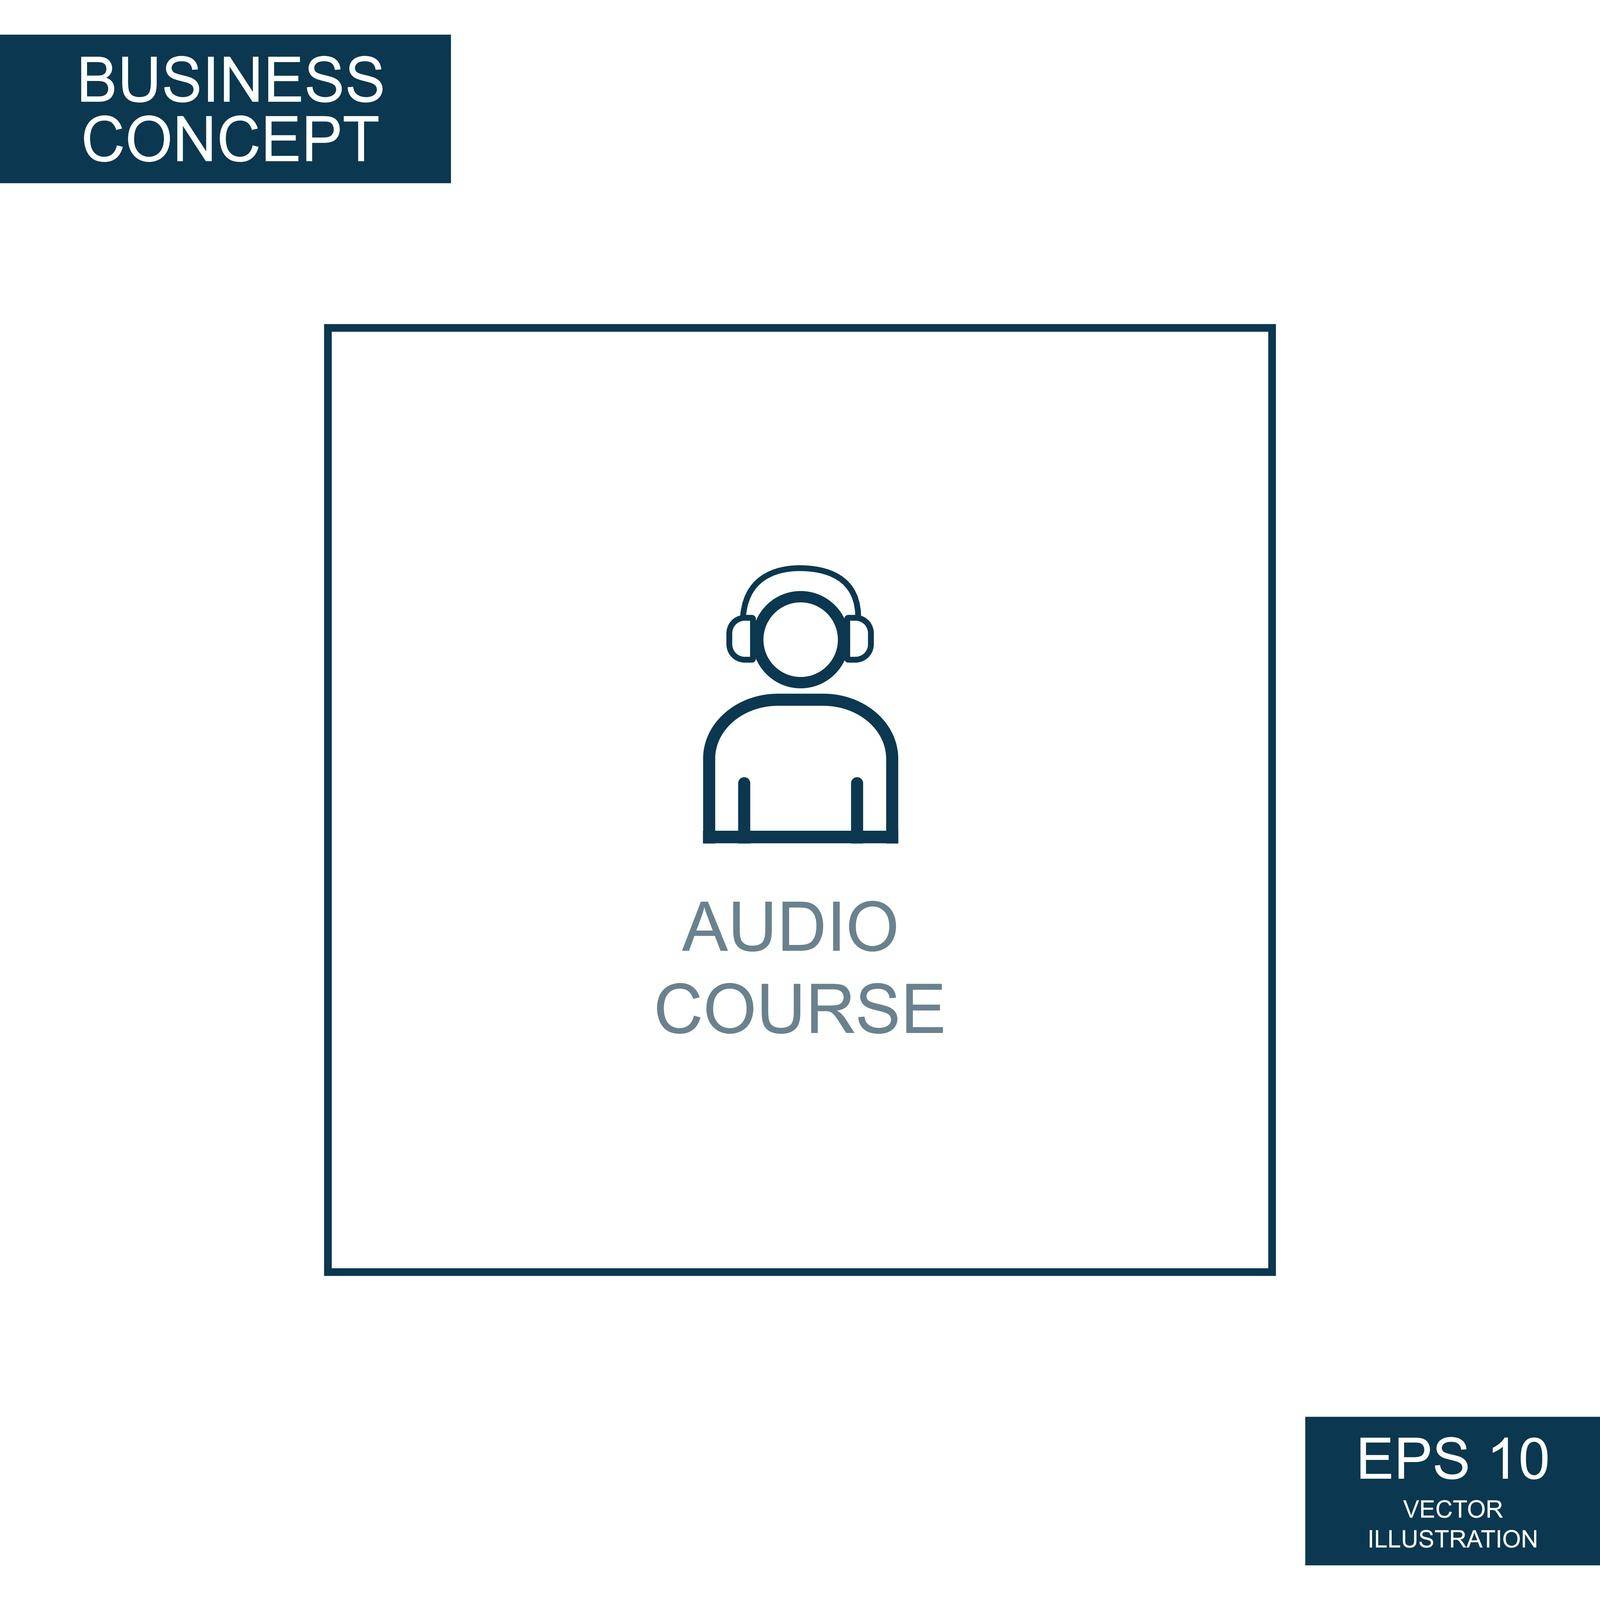 Business concept, web icon from thin lines. Audio course - Vector illustration